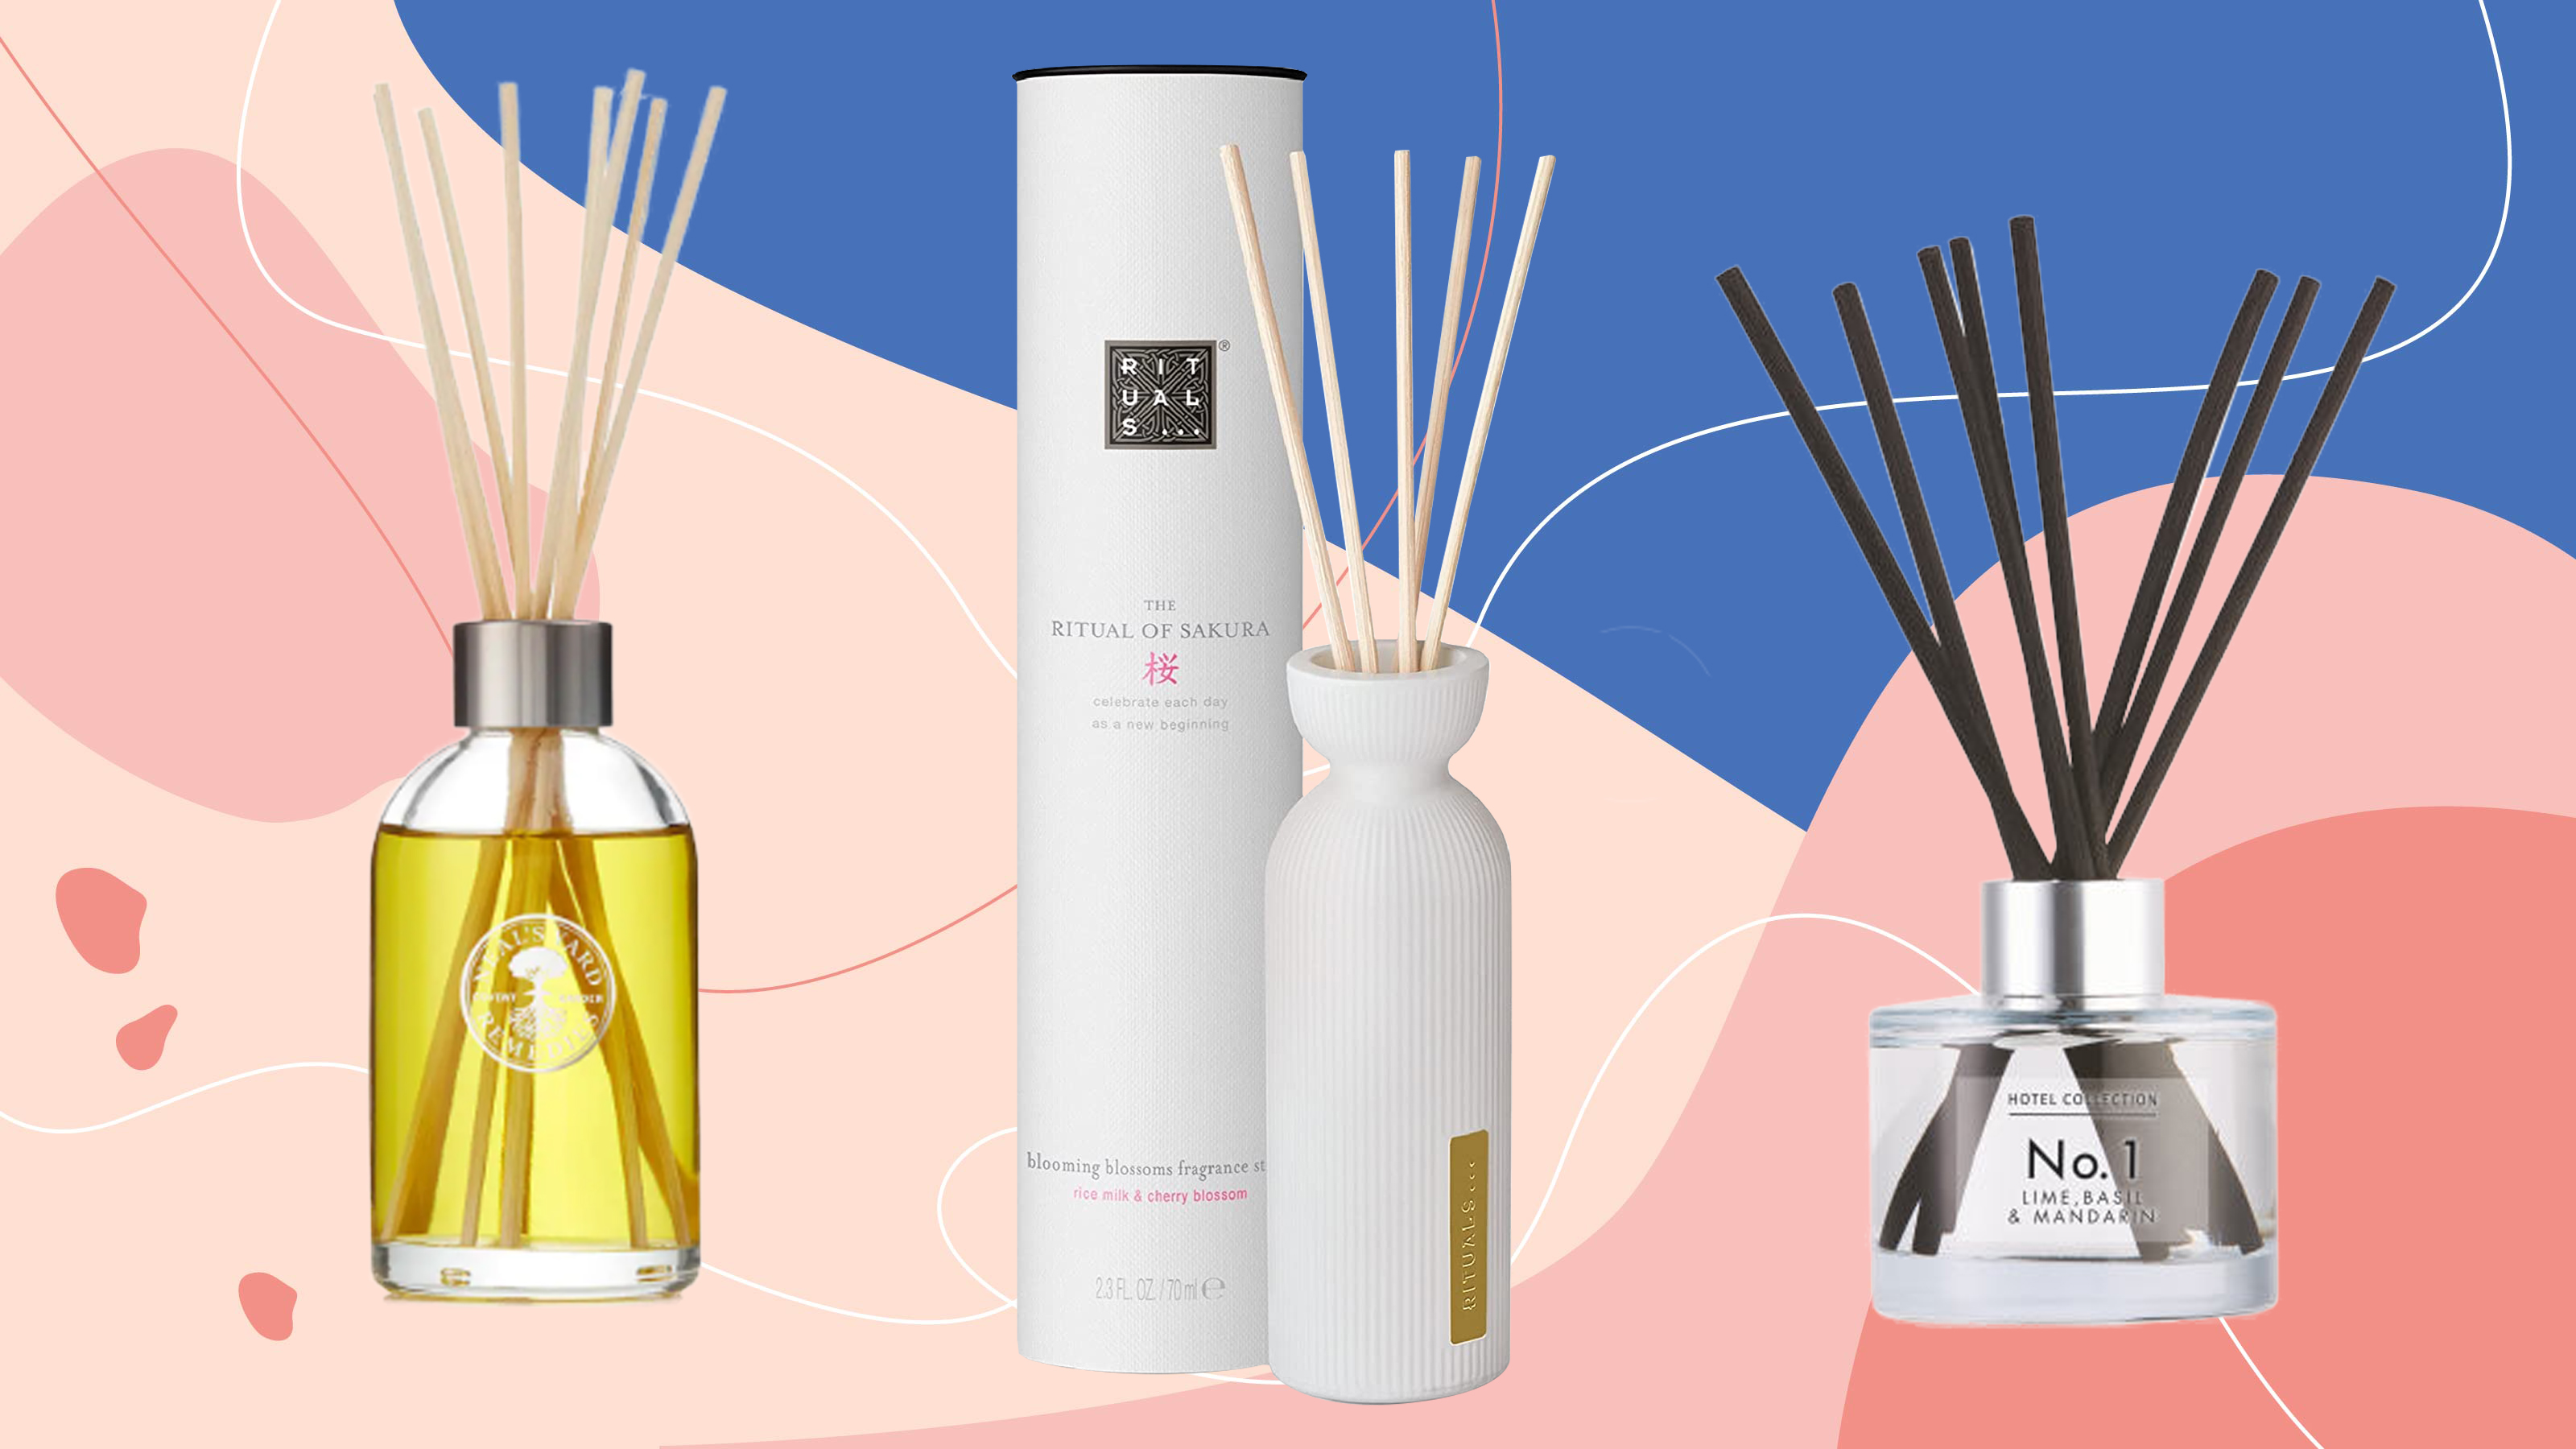 6 Best Dupes for The Ritual Of Sakura Hand Wash by Rituals Cosmetics